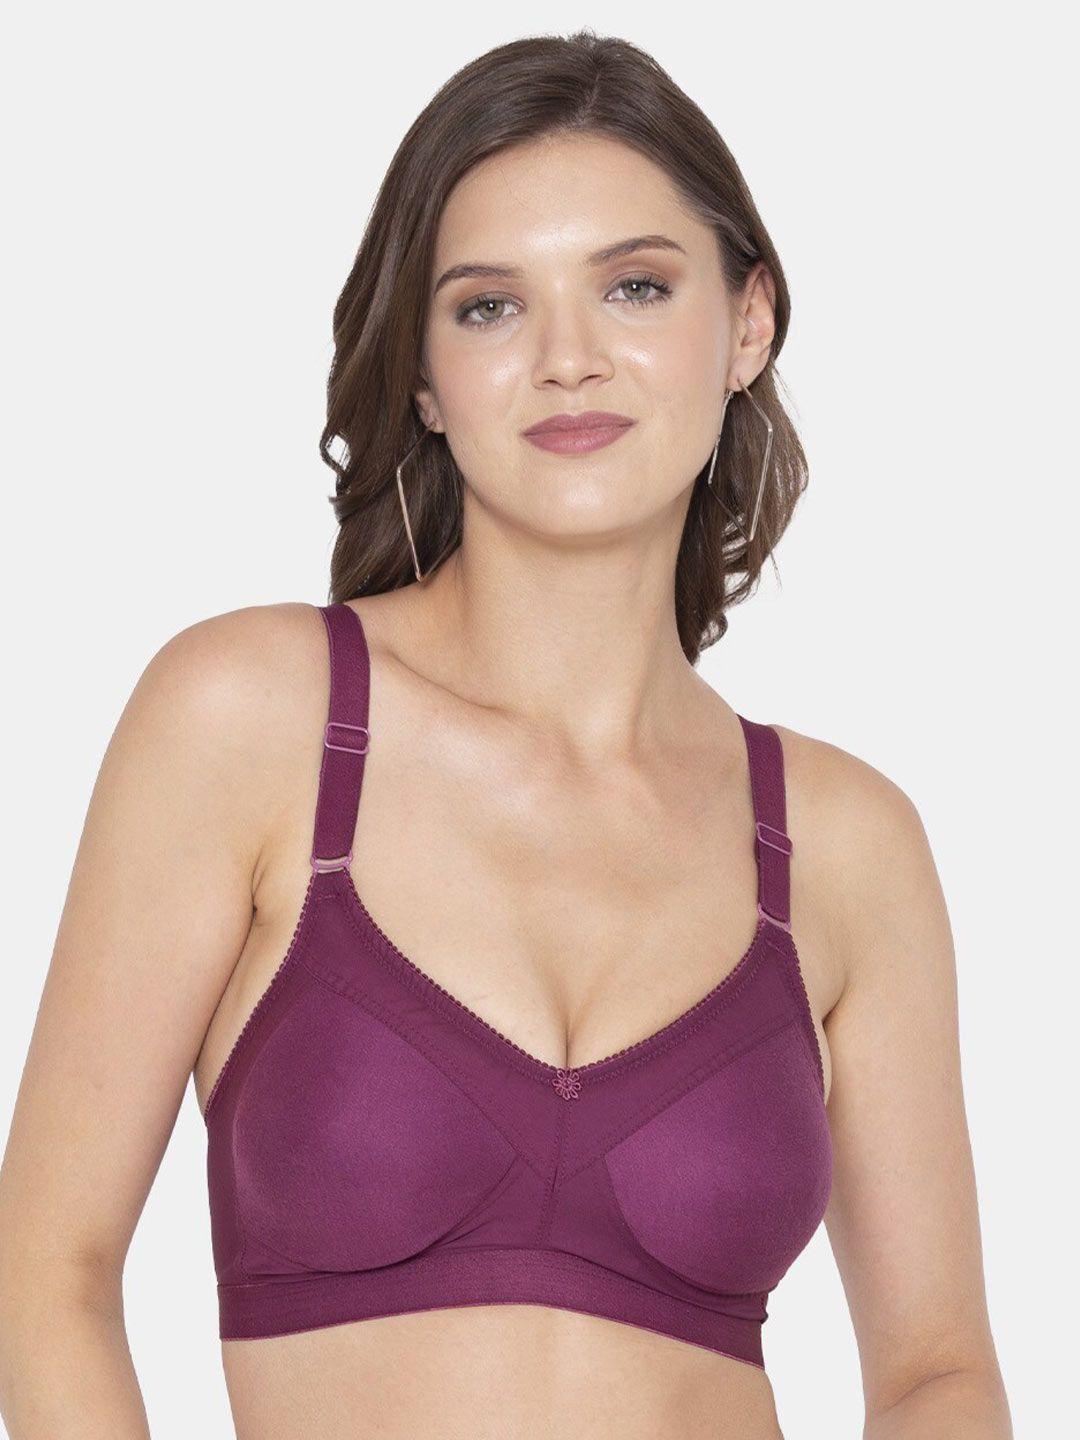 souminie magenta solid cotton bra with all day comfort features